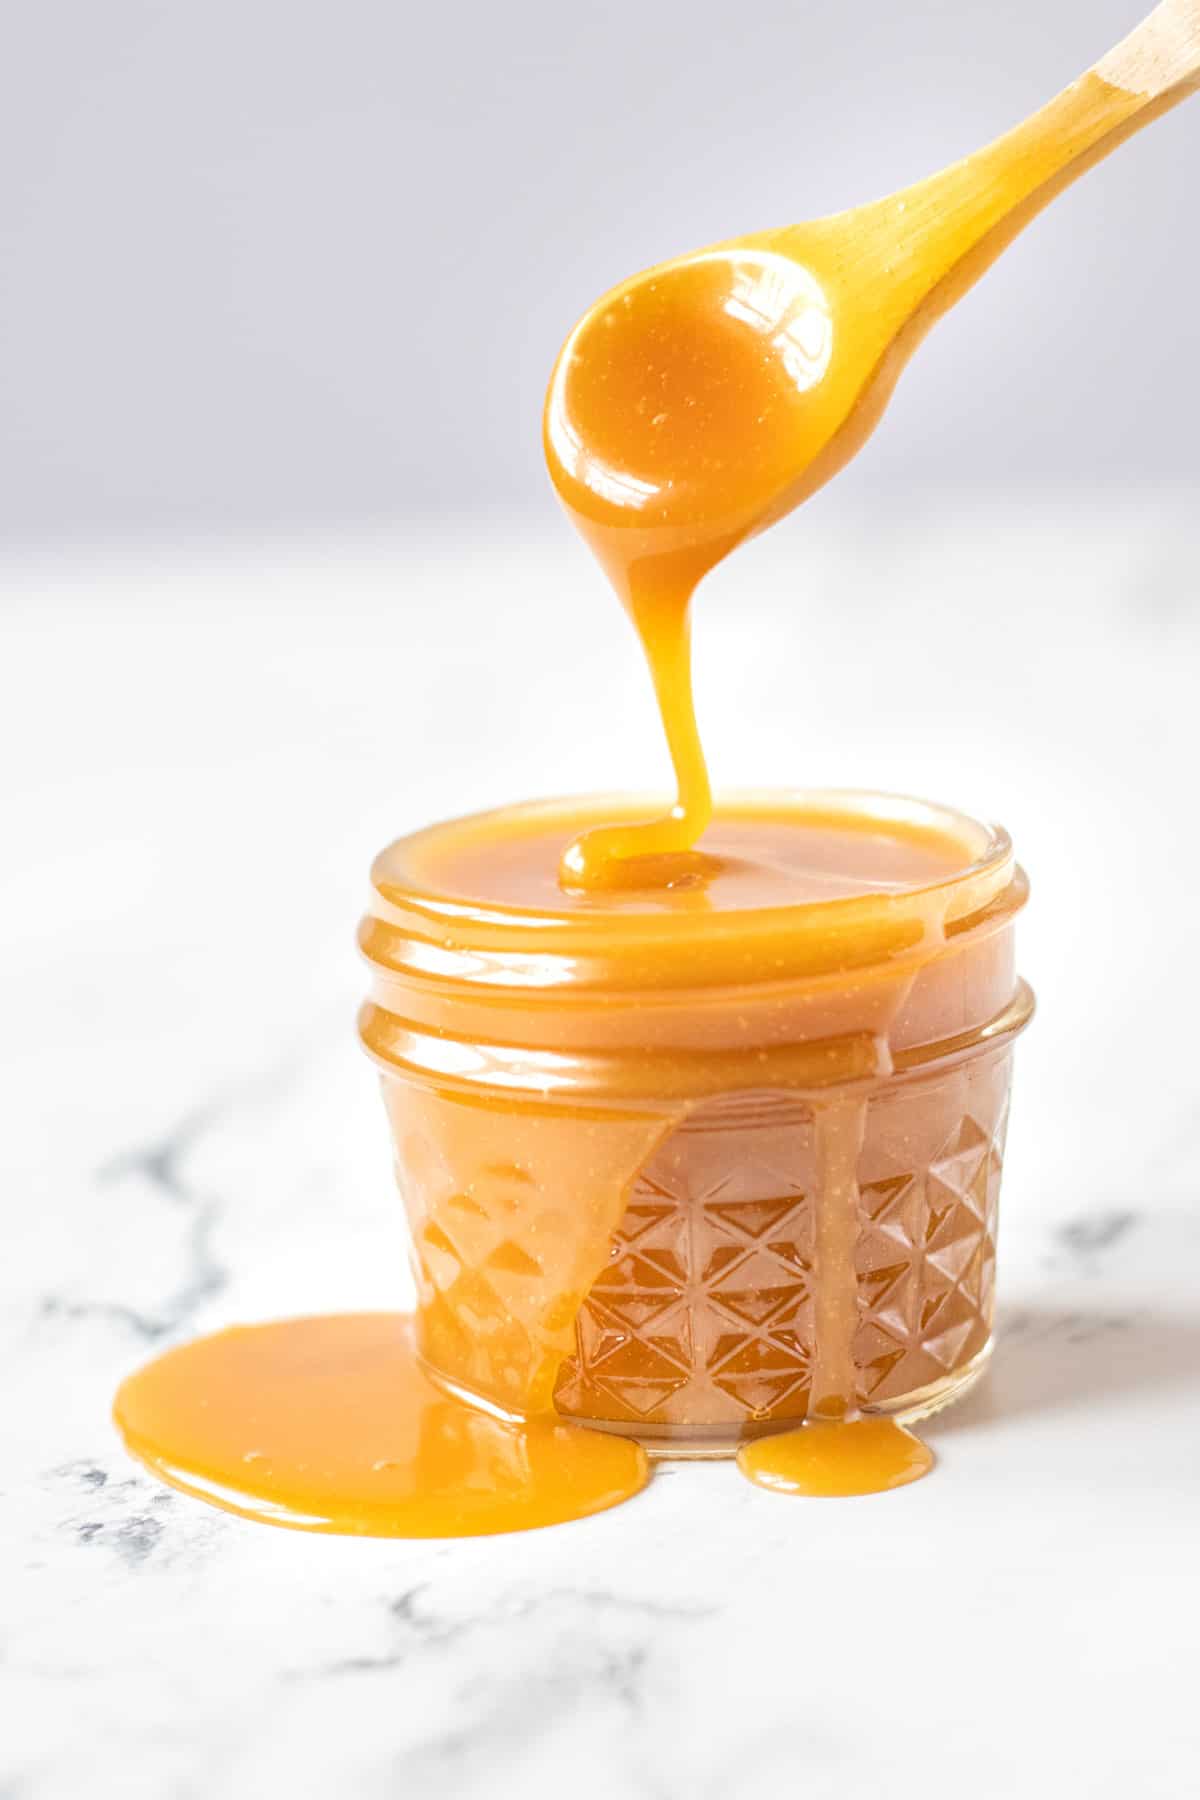 Glass jar overfilled with caramel sauce dripping over the edge with a caramel dipped wooden spoon.